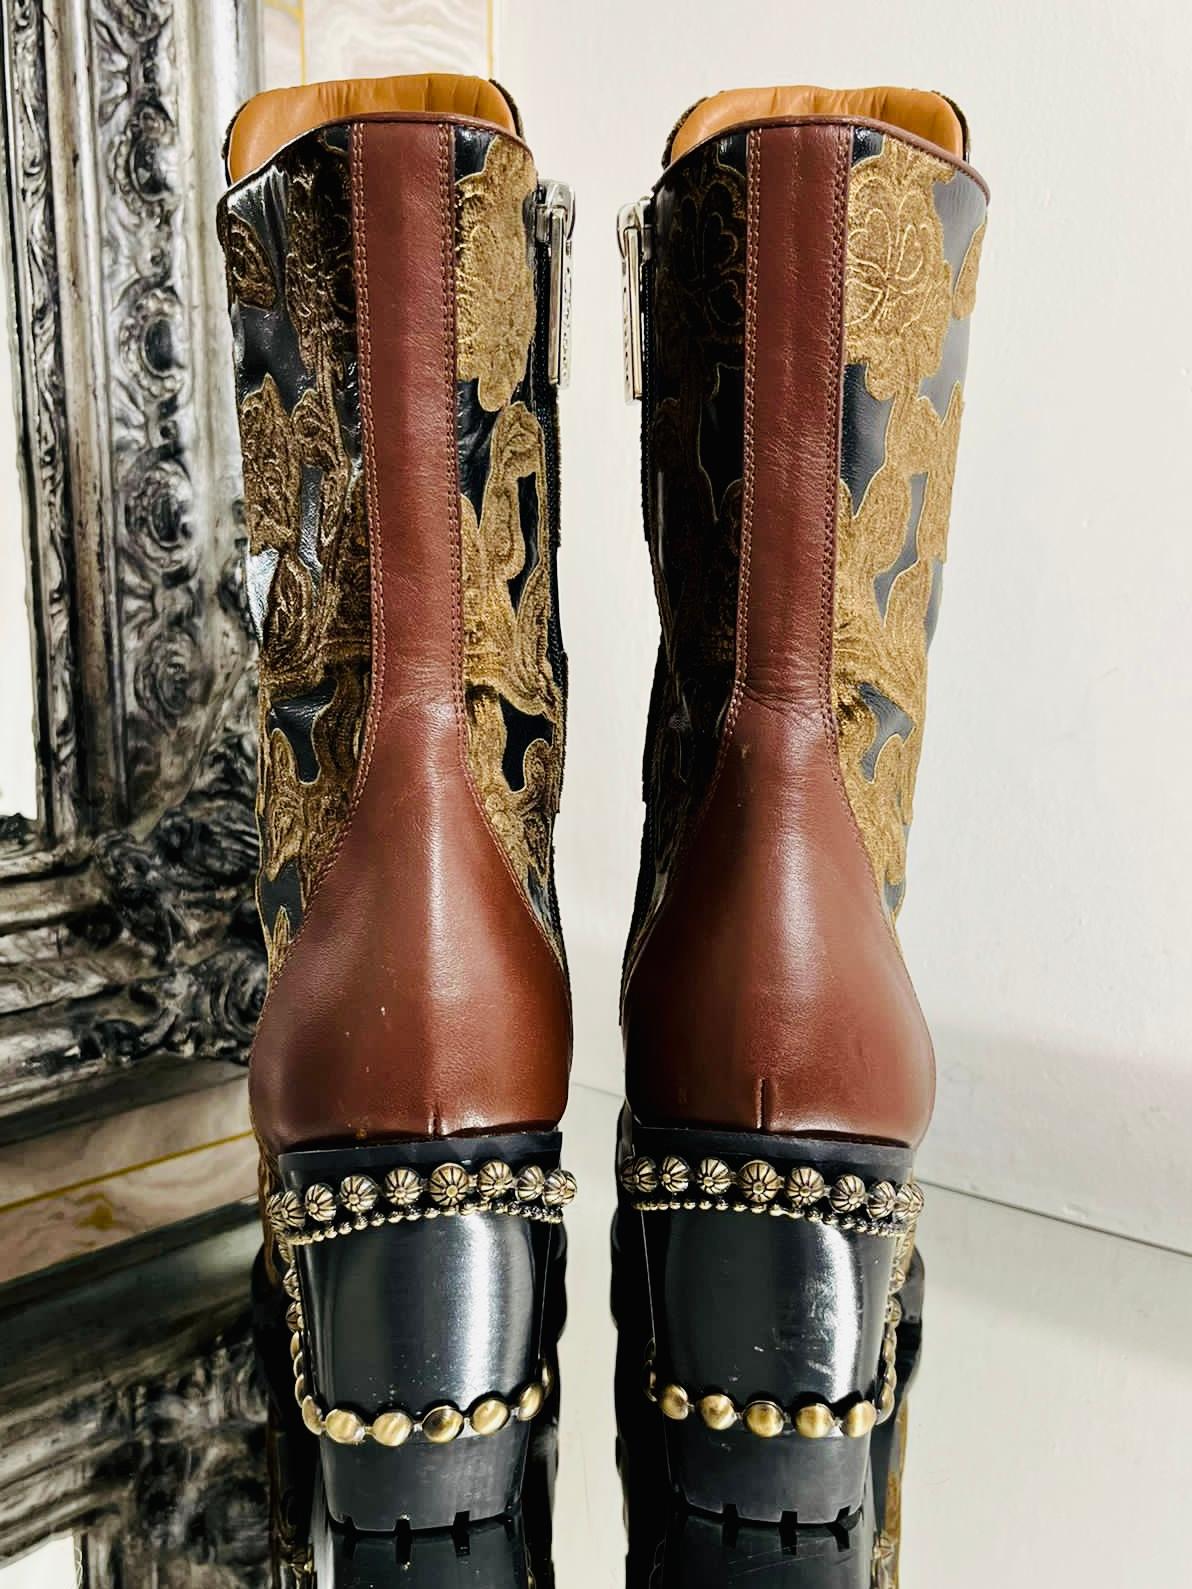 Chloe Rylee Brocade & Stud Ankle Boots For Sale 1